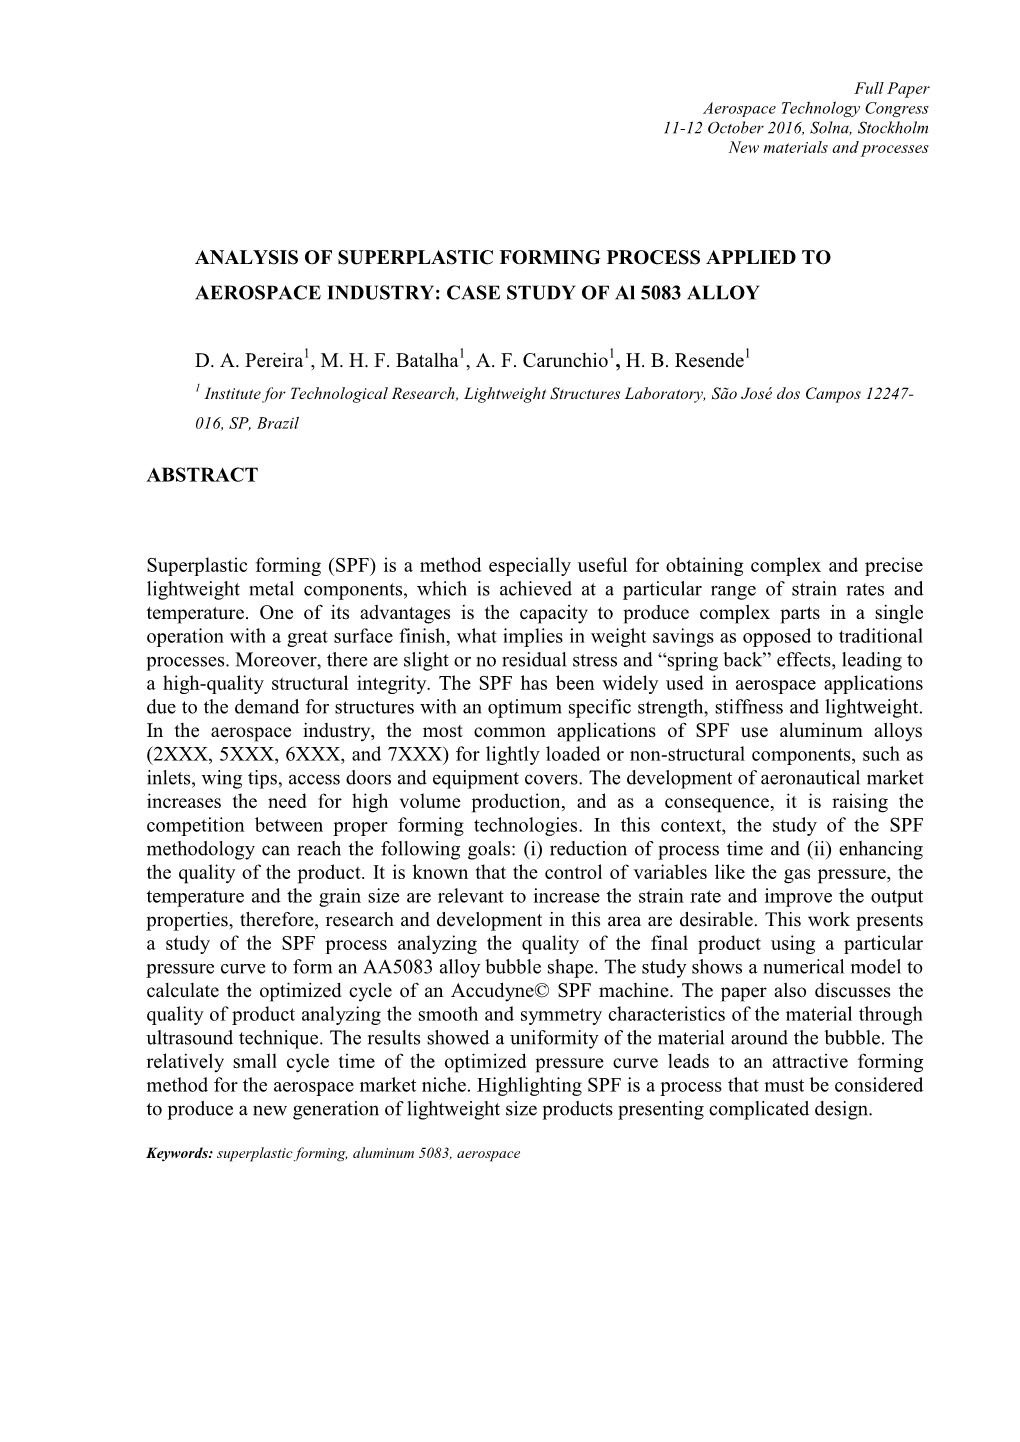 ANALYSIS of SUPERPLASTIC FORMING PROCESS APPLIED to AEROSPACE INDUSTRY: CASE STUDY of Al 5083 ALLOY D. A. Pereira , M. H. F